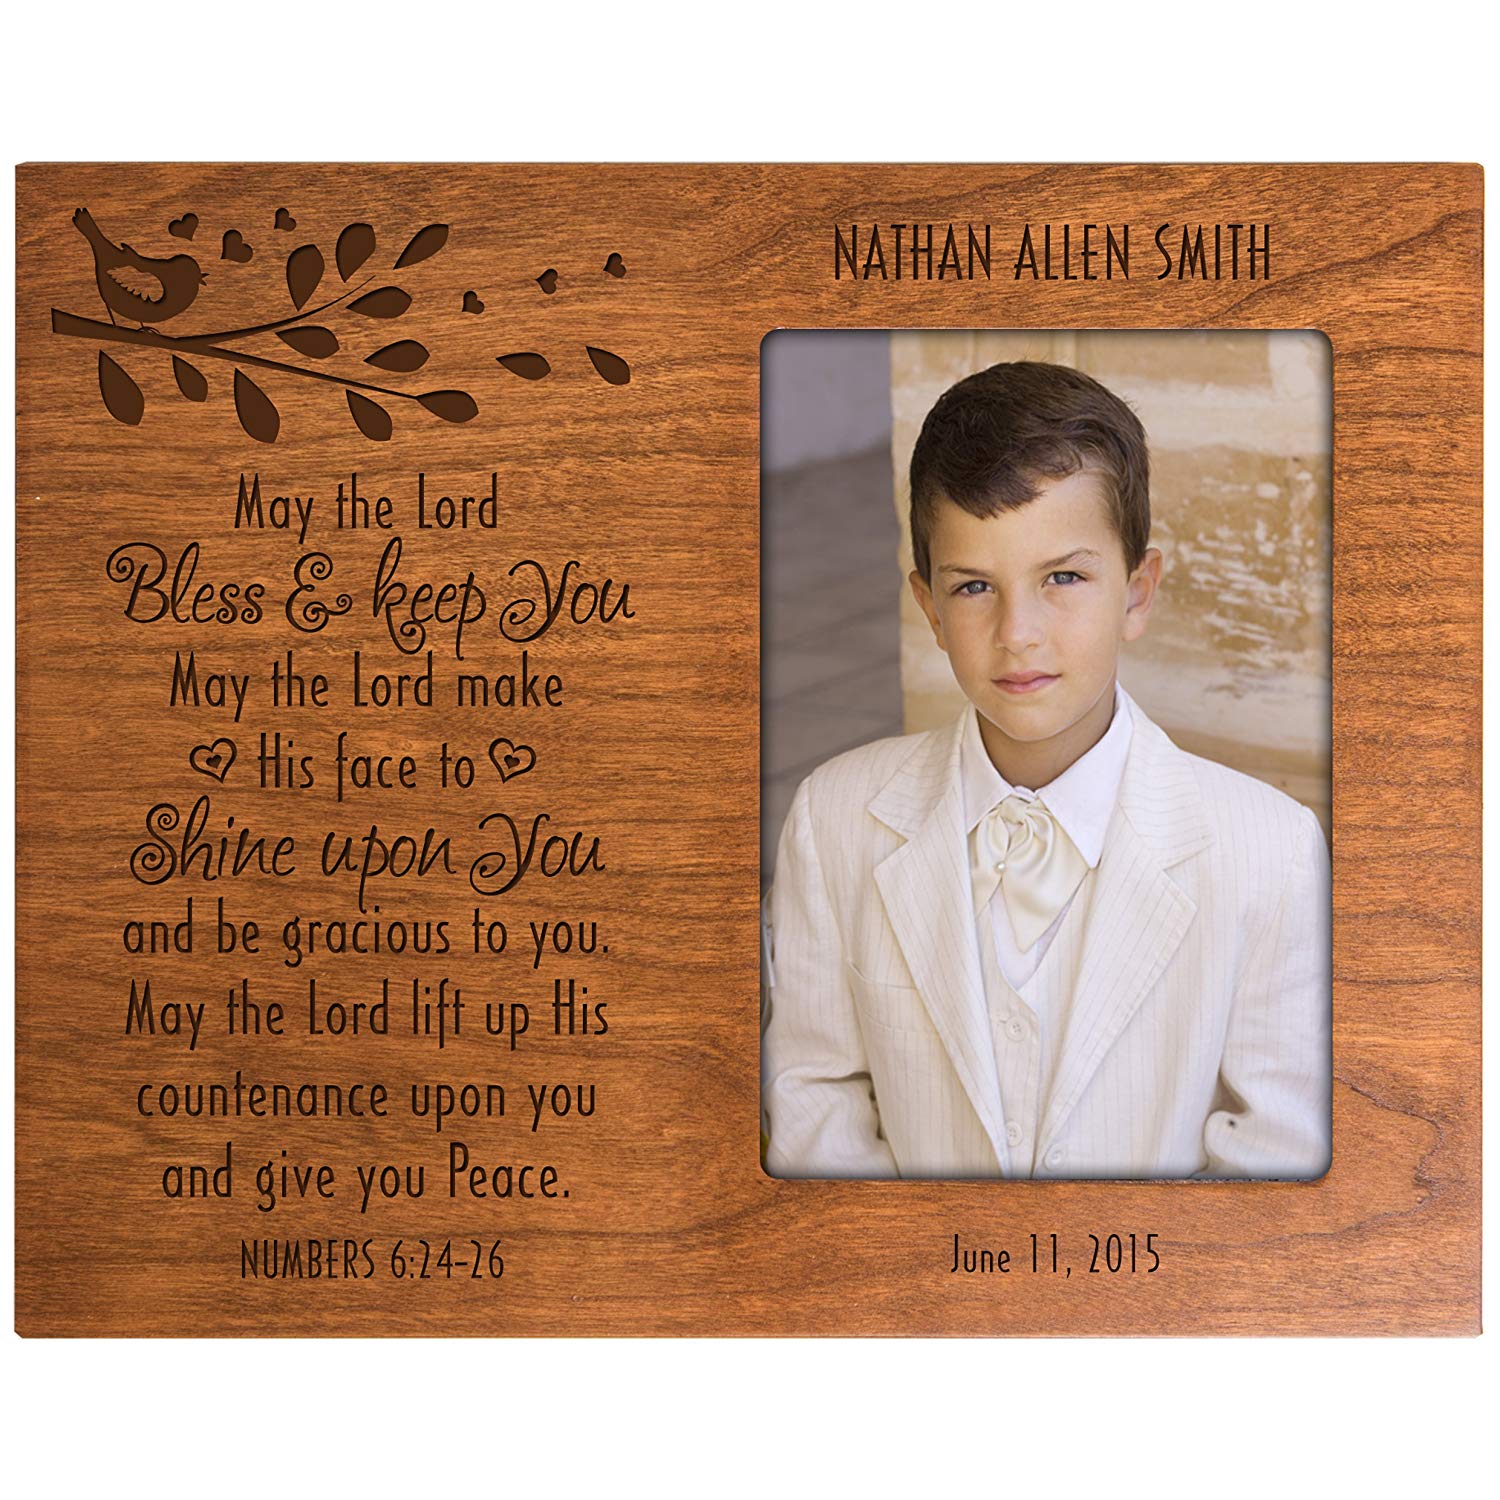 Personalized Baptism Photo Frame Gift "Bless & Keep You" - LifeSong Milestones